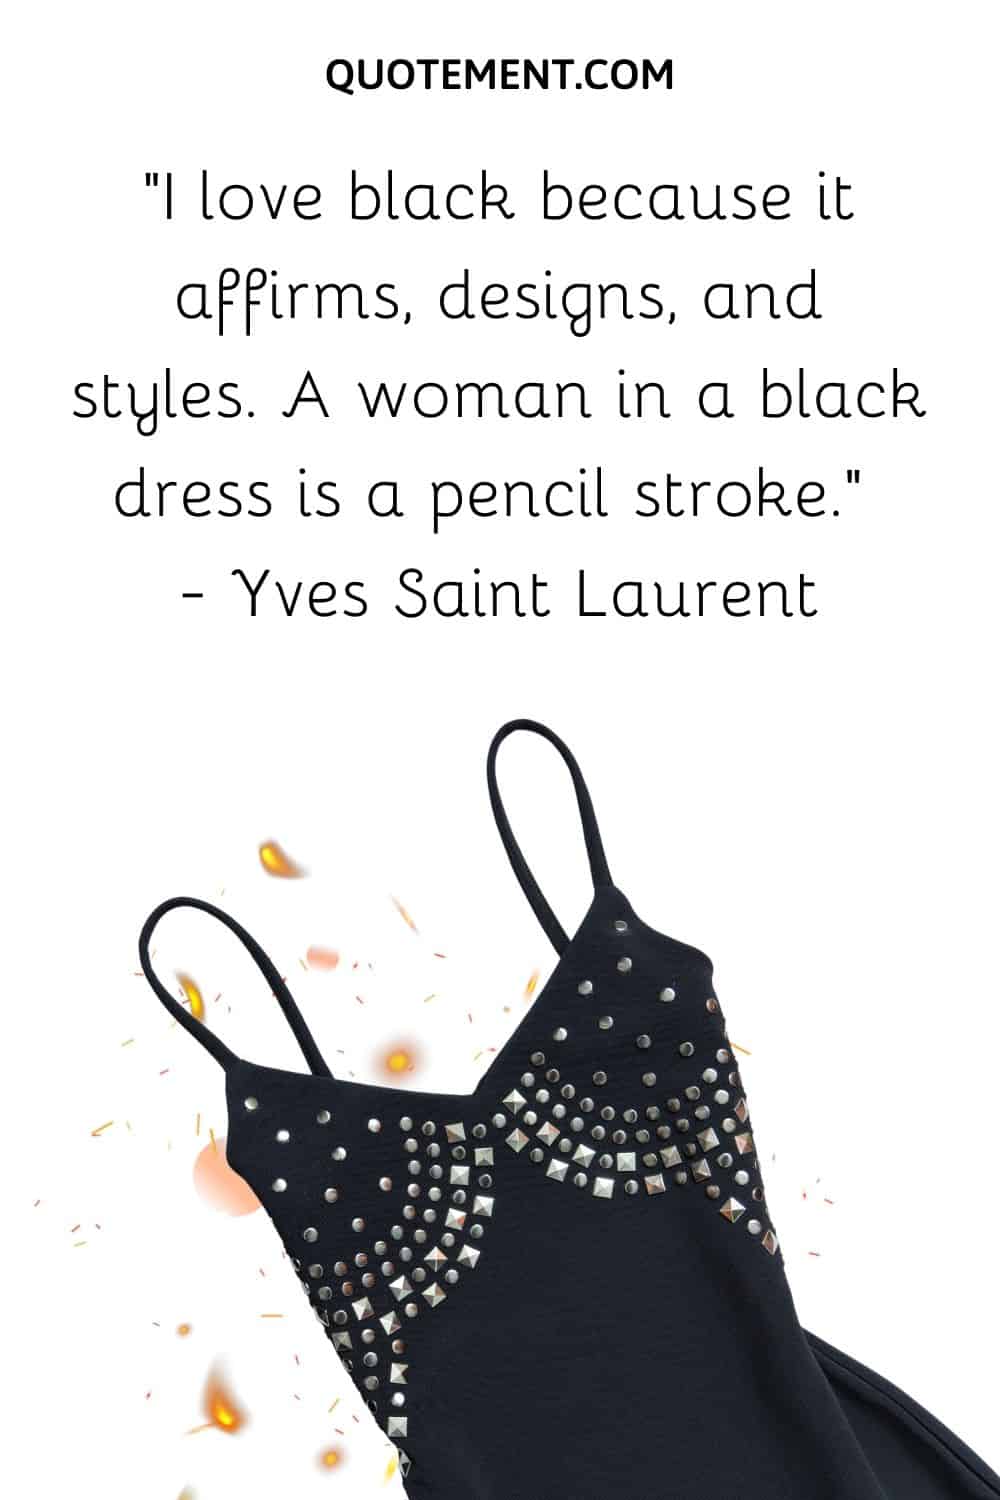 “I love black because it affirms, designs, and styles. A woman in a black dress is a pencil stroke.” — Yves Saint Laurent